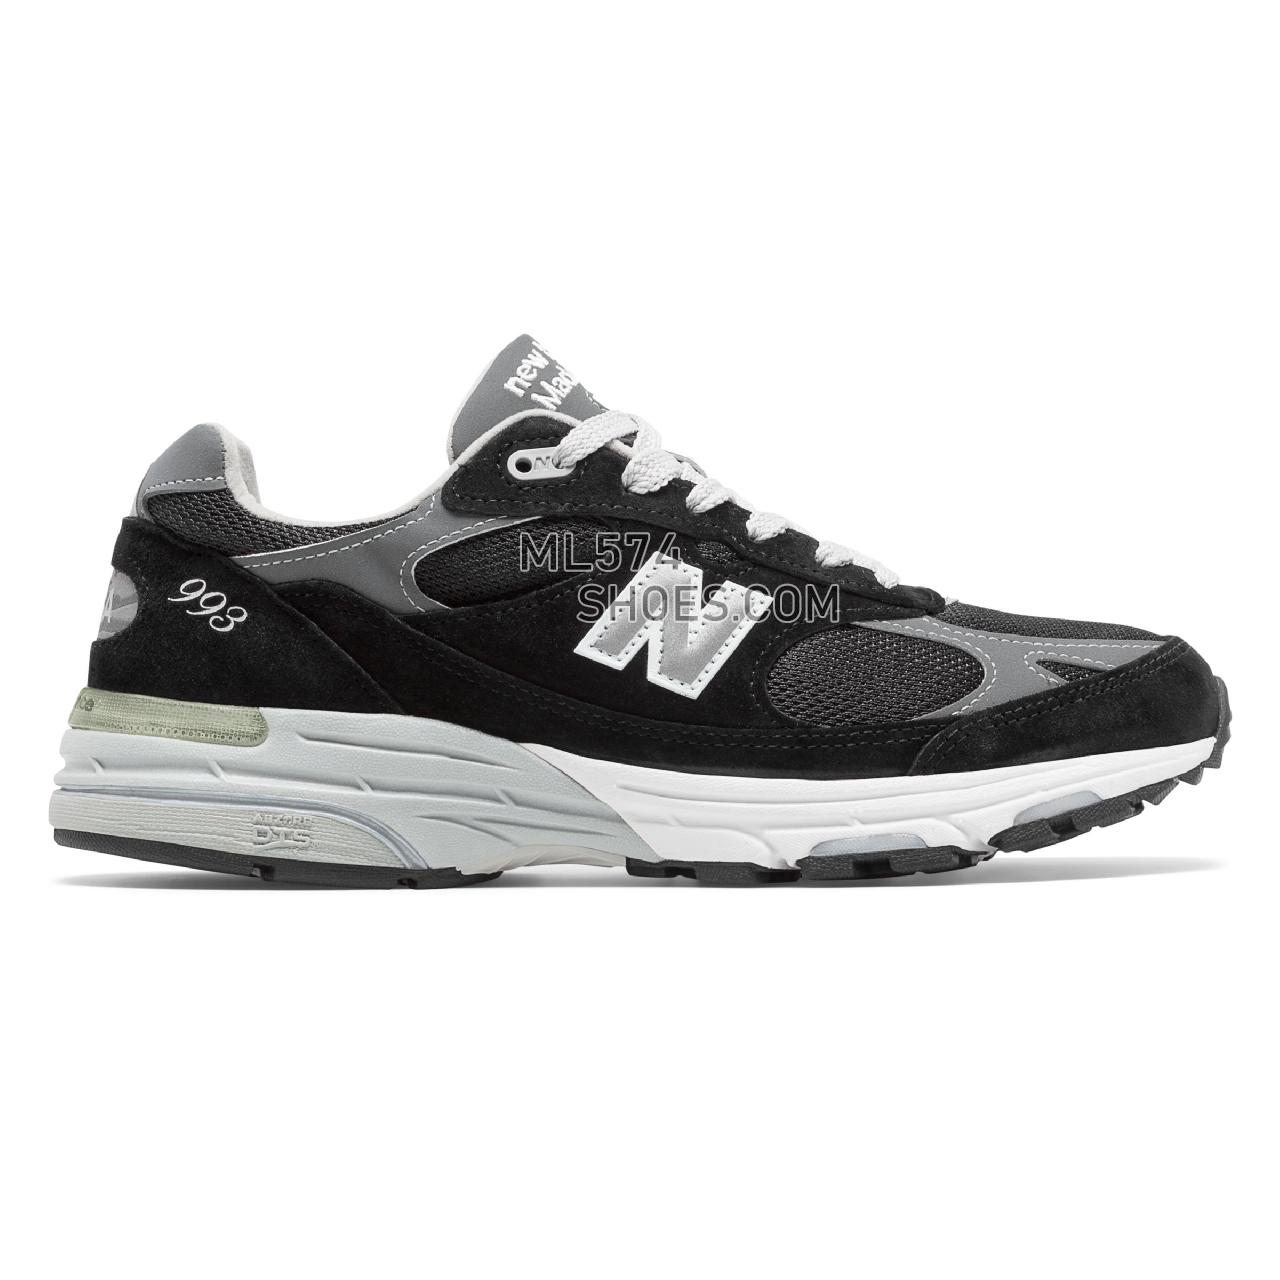 New Balance Made in US 993 - Women's Neutral Running - Black with Grey - WR993BK